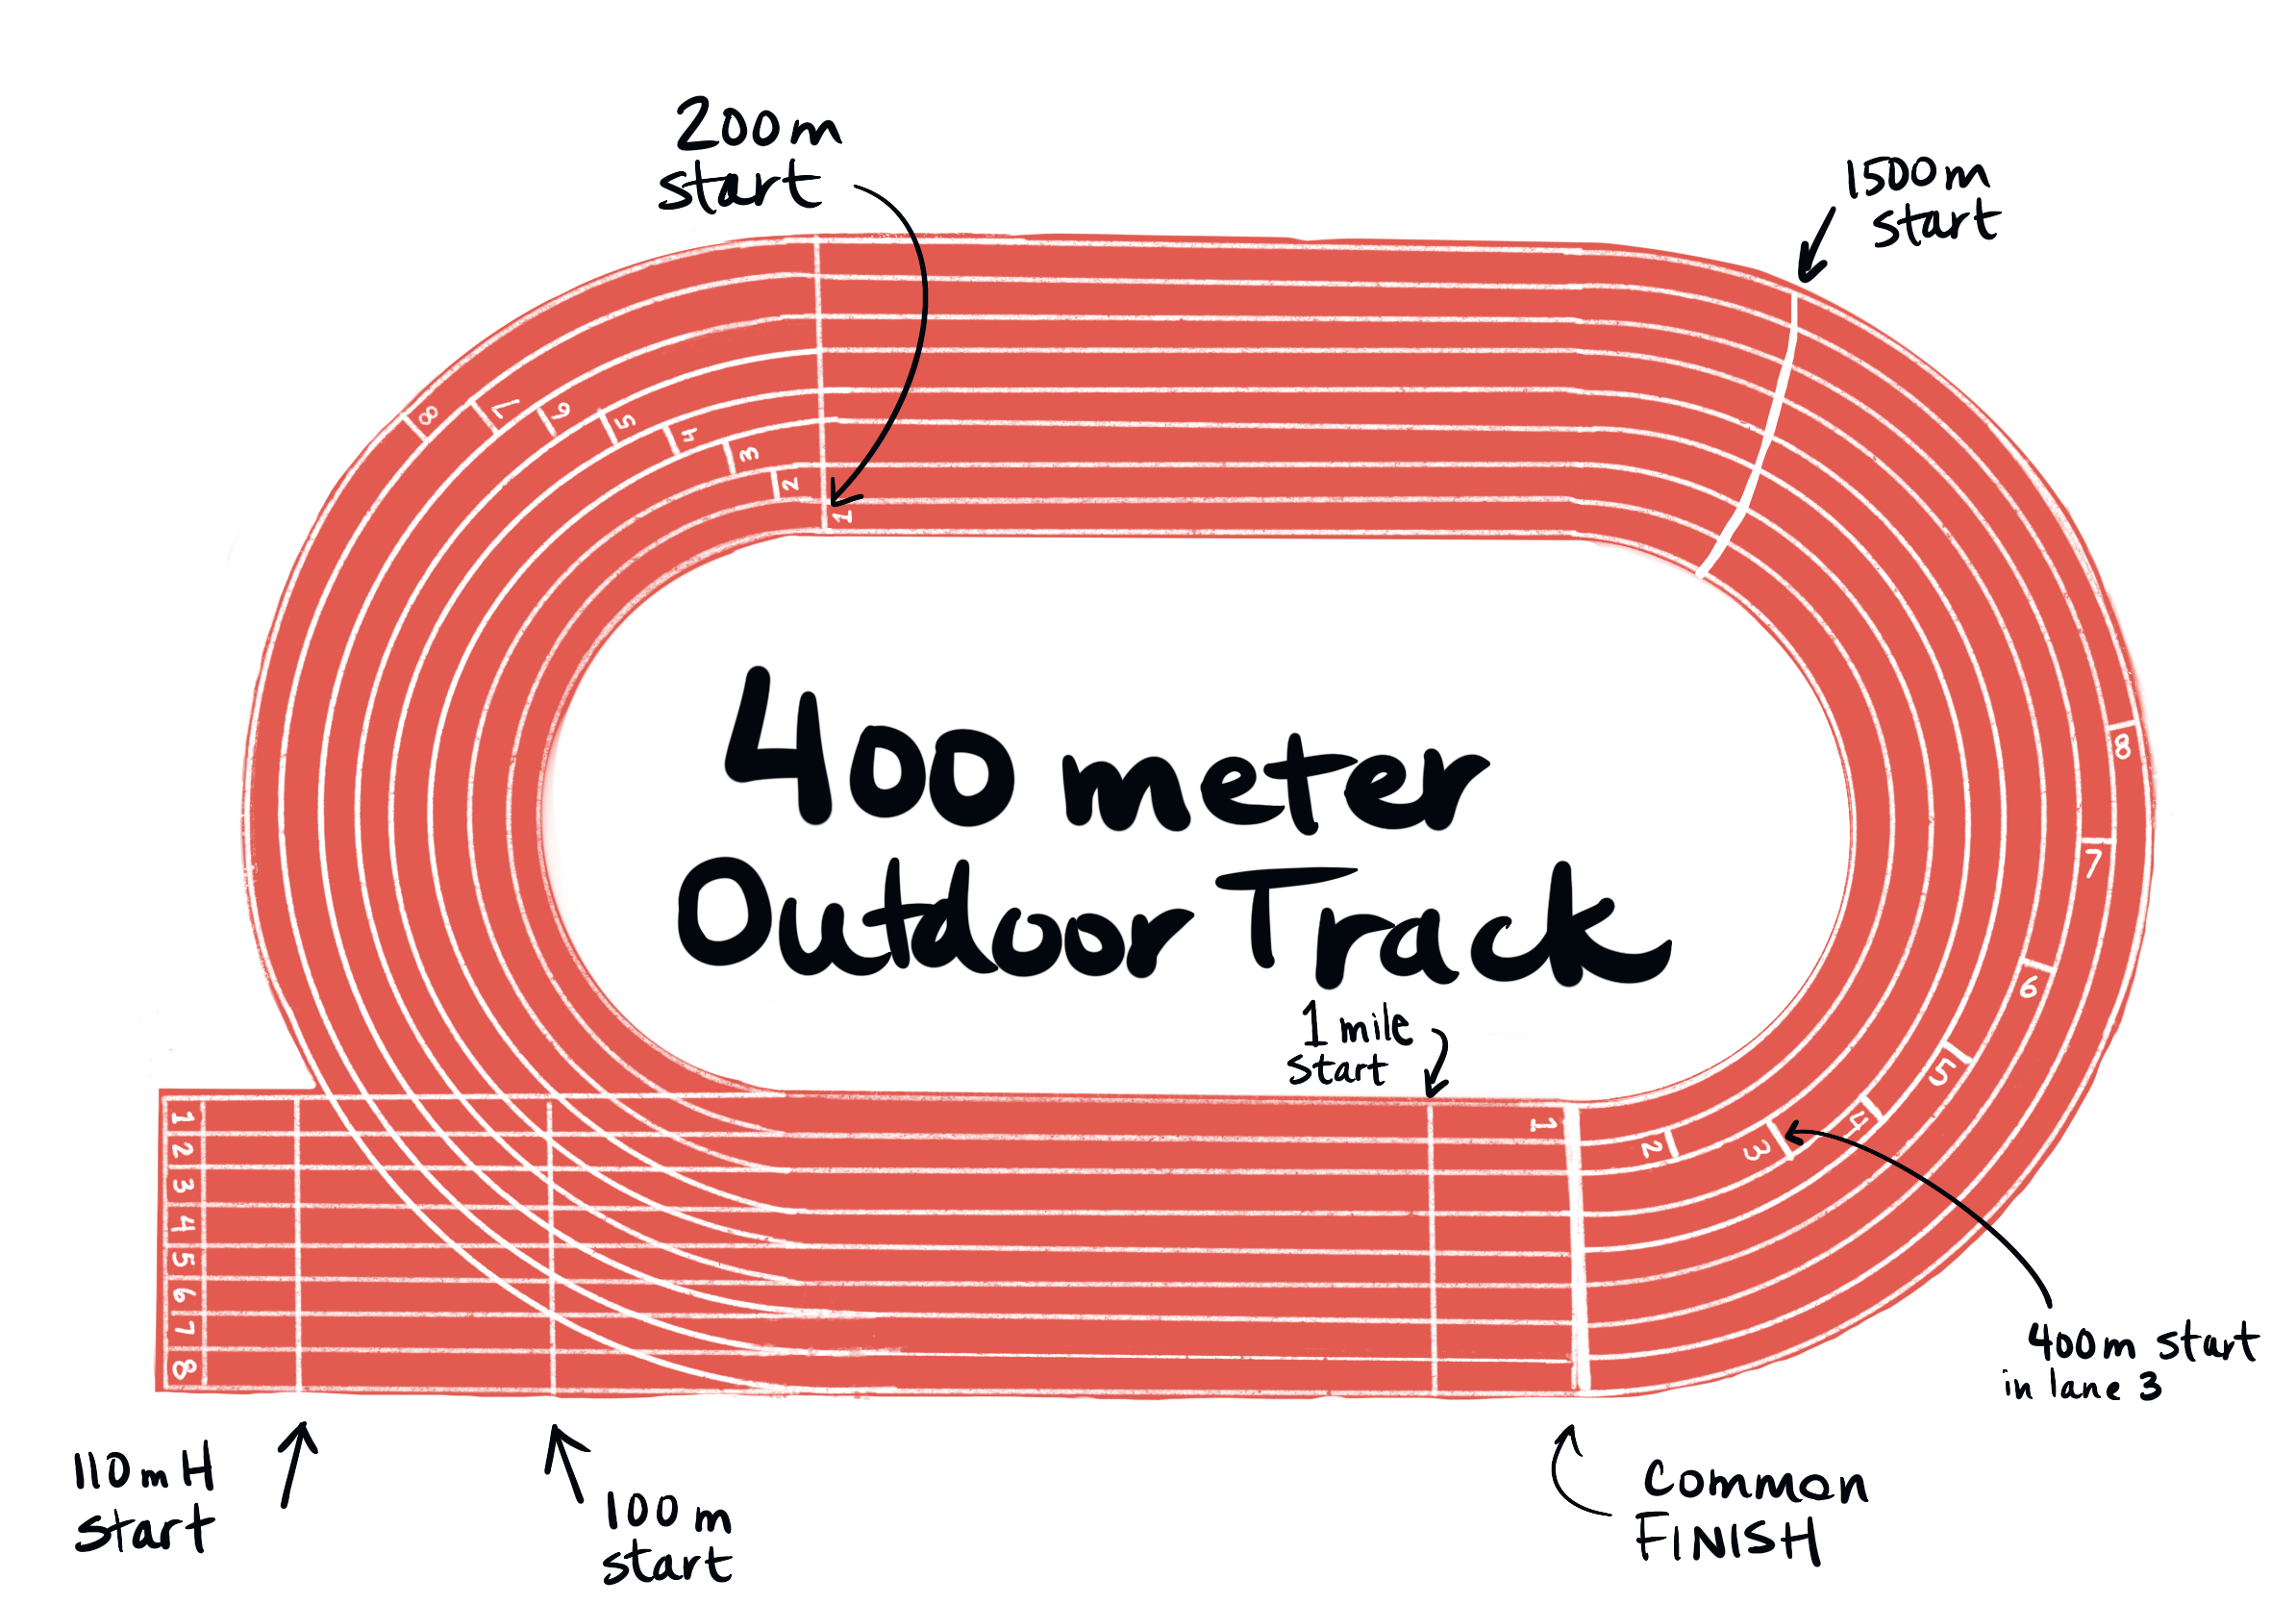 how many lanes are on a typical track